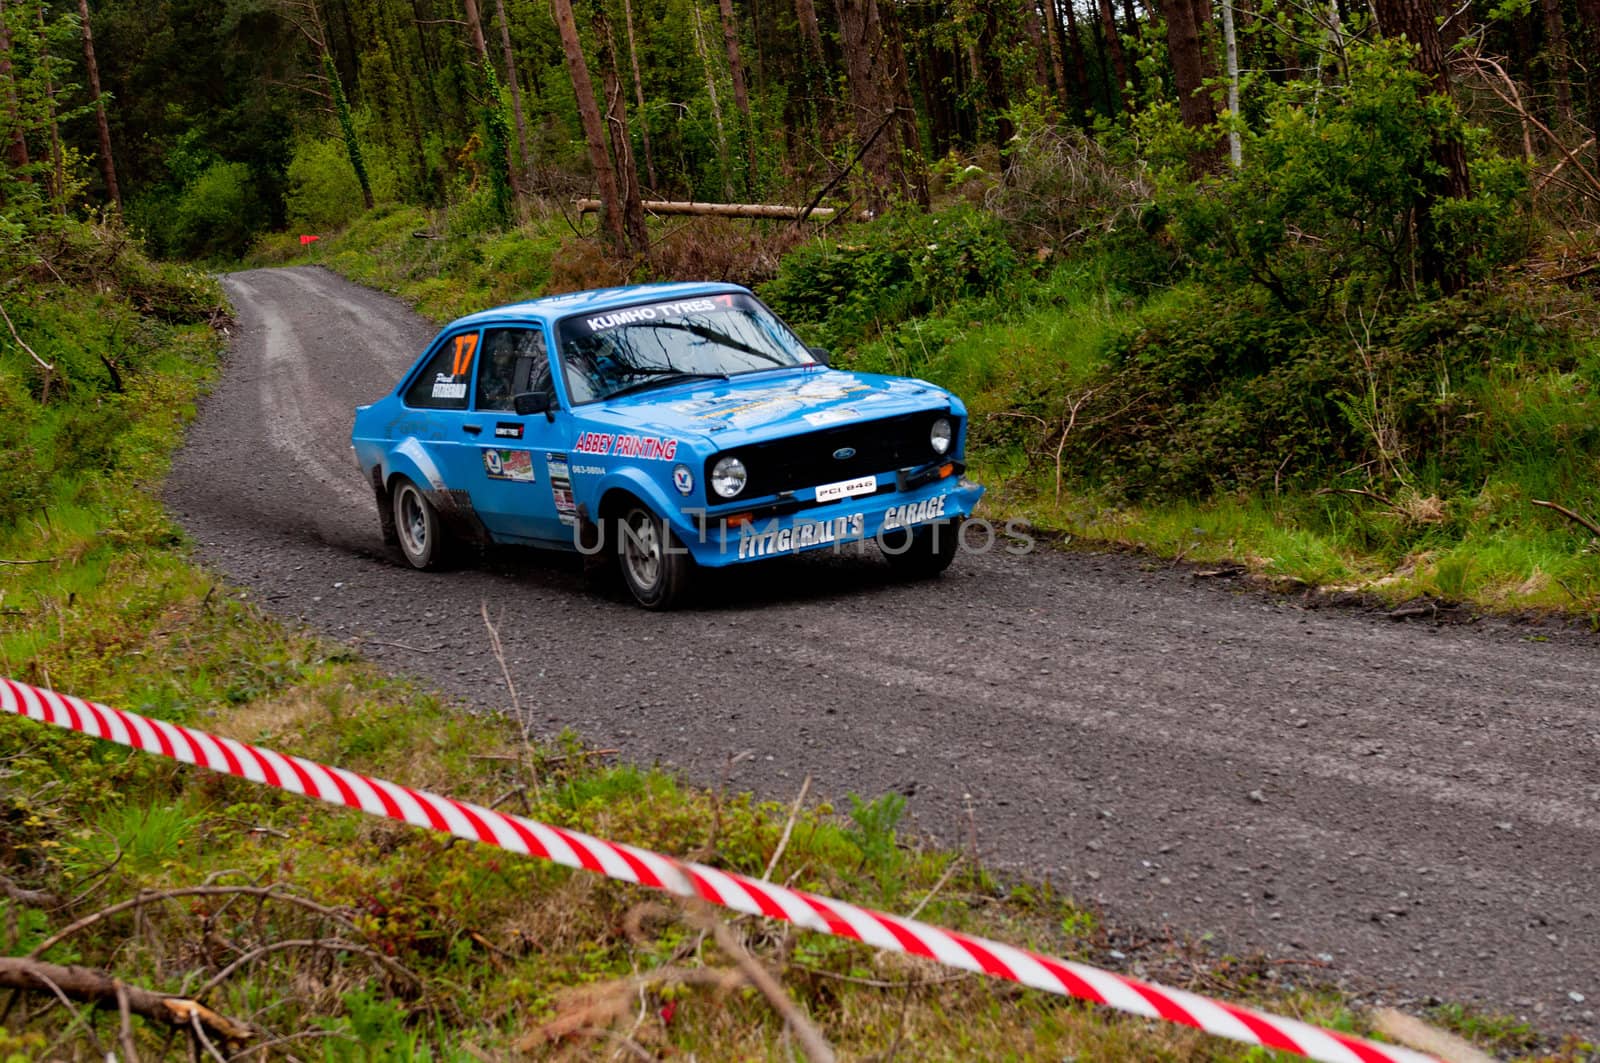 MALLOW, IRELAND - MAY 19: P. Fitzgerald driving Ford Escort at the Jim Walsh Cork Forest Rally on May 19, 2012 in Mallow, Ireland. 4th round of the Valvoline National Forest Rally Championship.